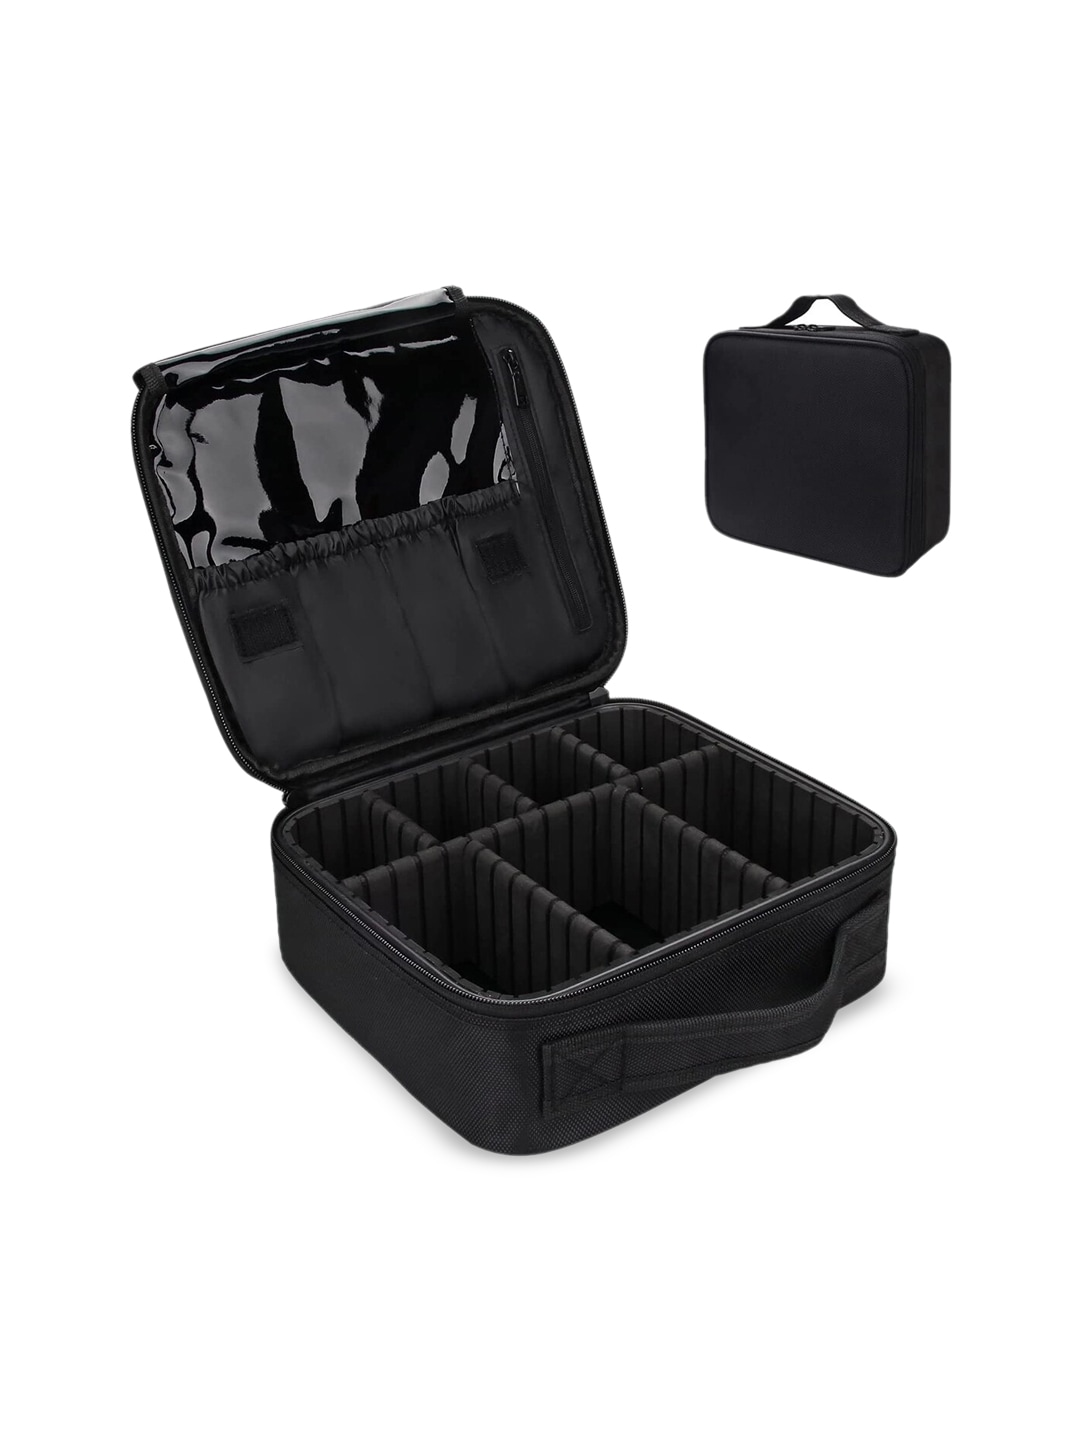 HOUSE OF QUIRK Women Black Solid Makeup Organiser Price in India